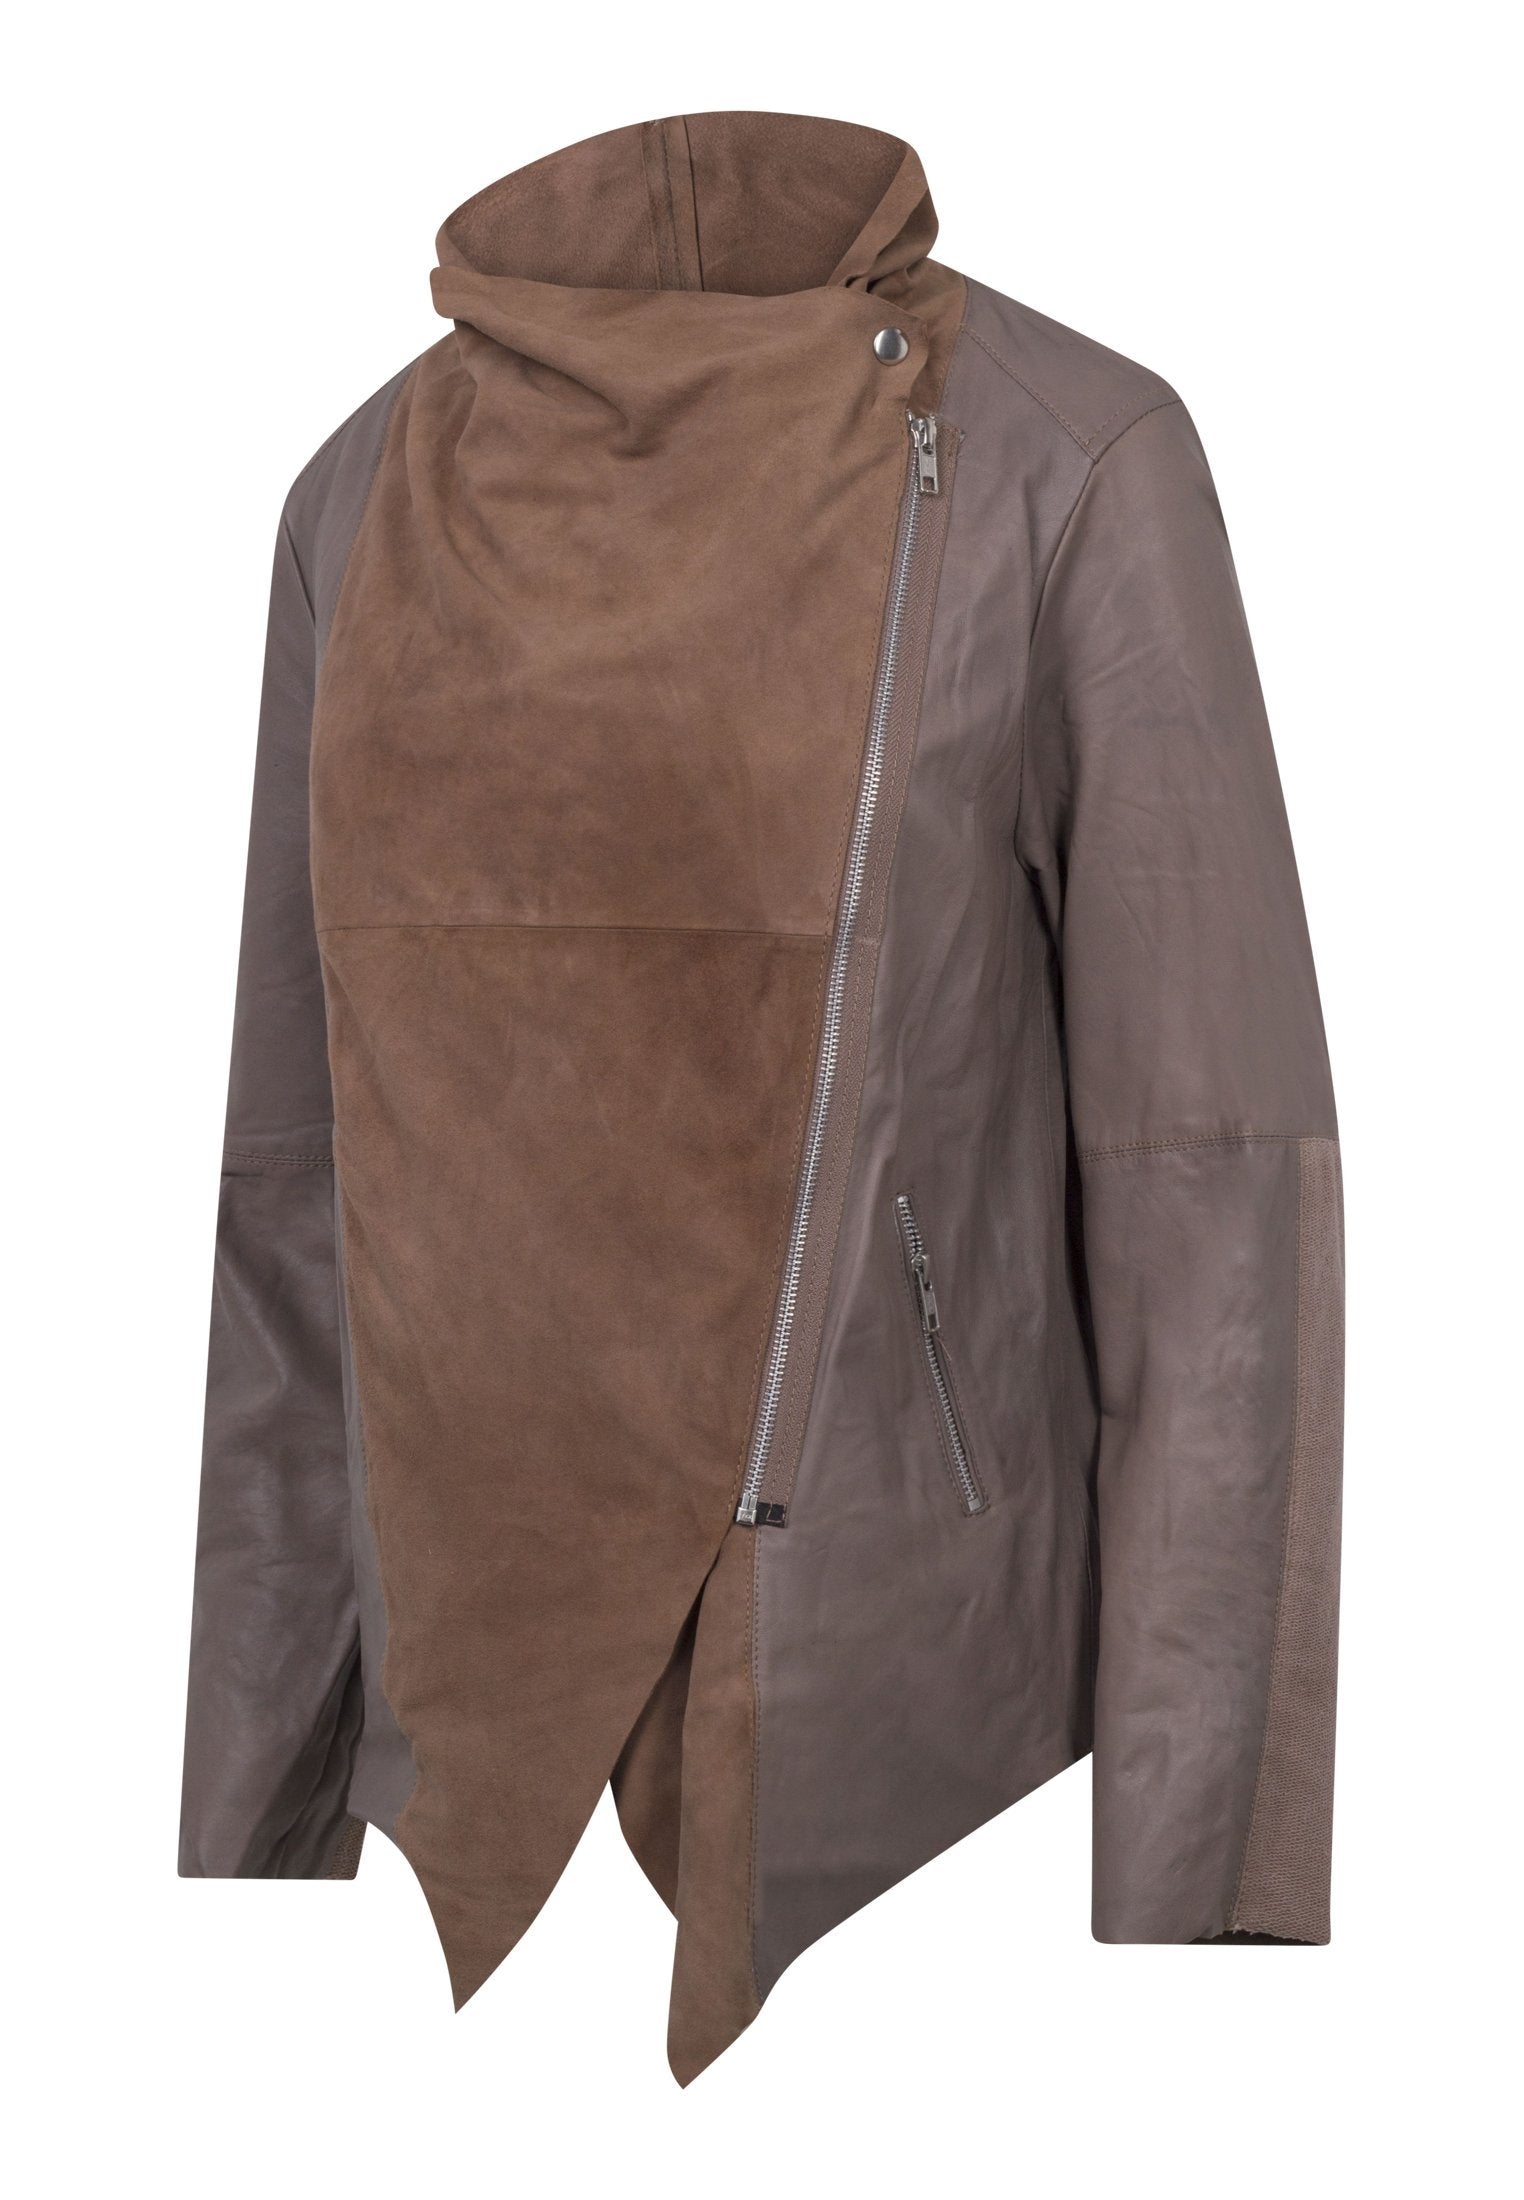 RELIGION Publicised Leather Jacket Taupe